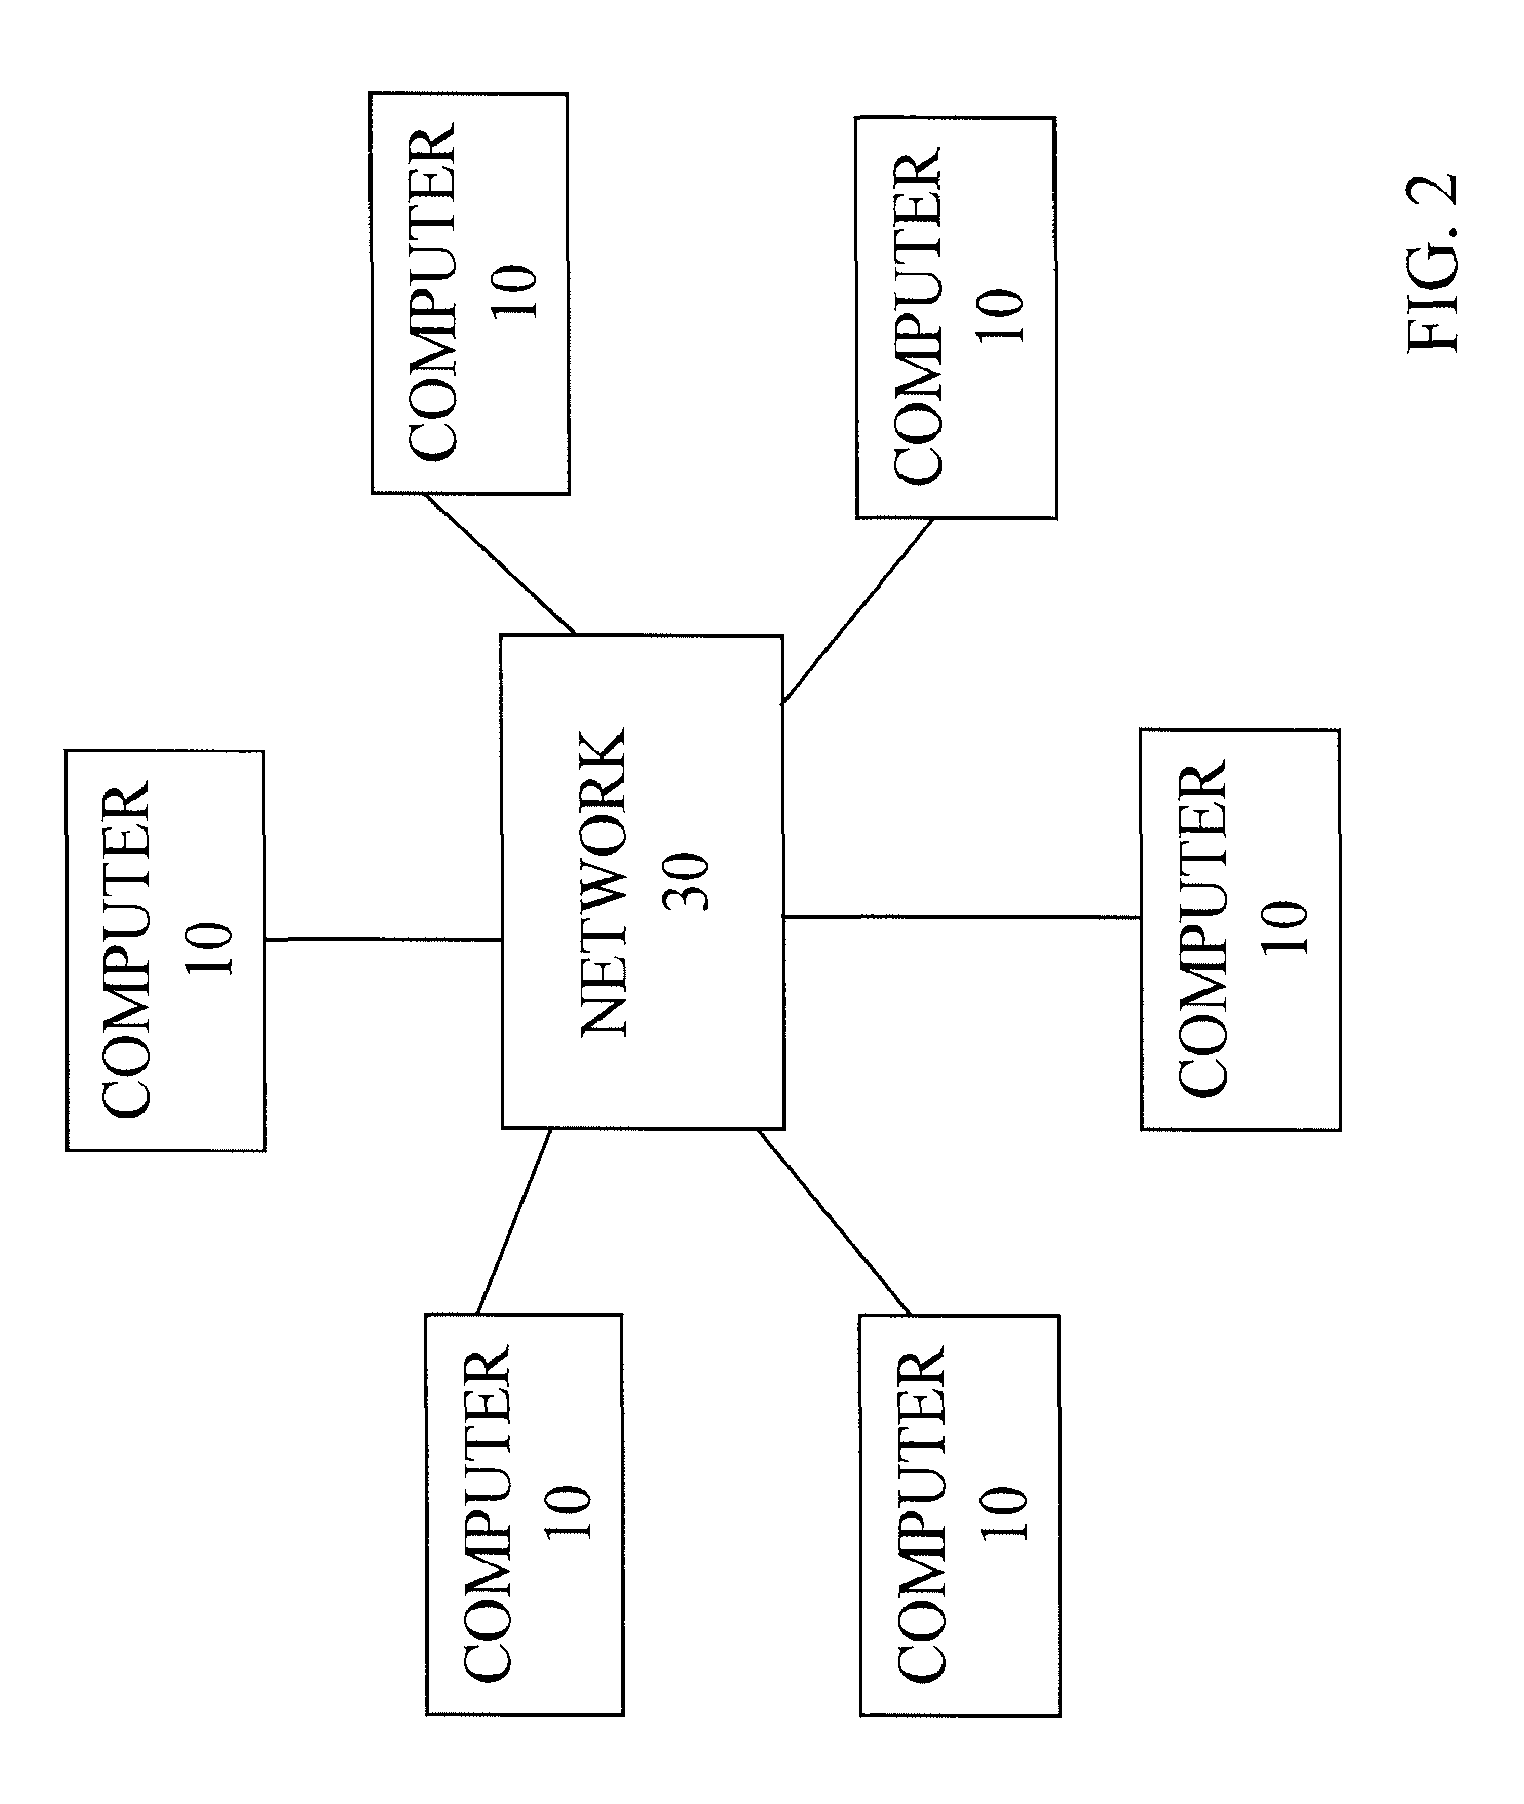 Methods and apparatuses for monitoring energy consumption and related operations